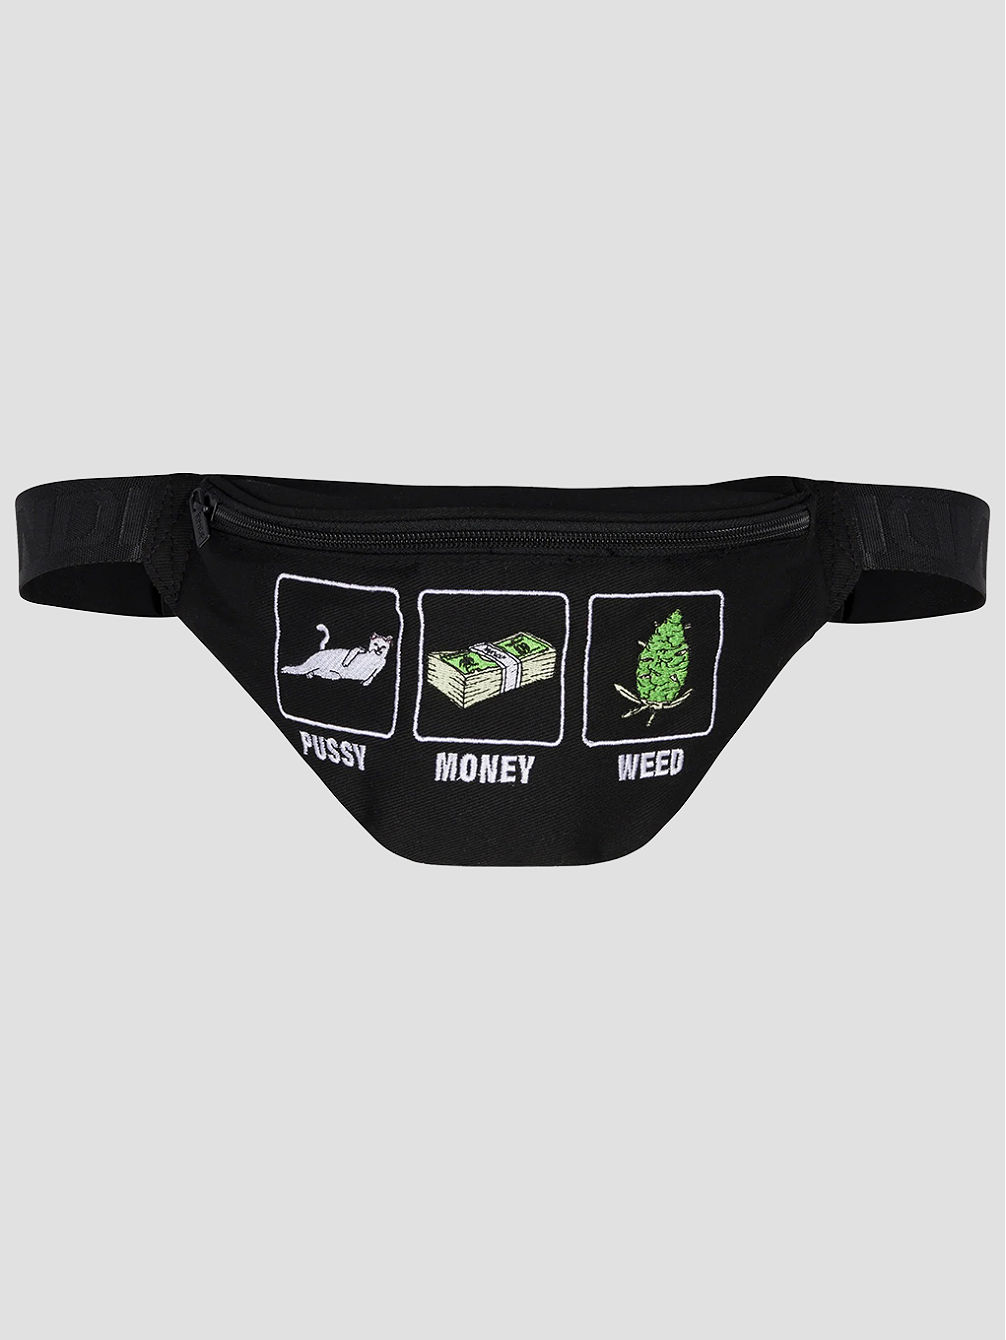 Pussy, Money, Weed Fanny Pack Umh&auml;ngetasche